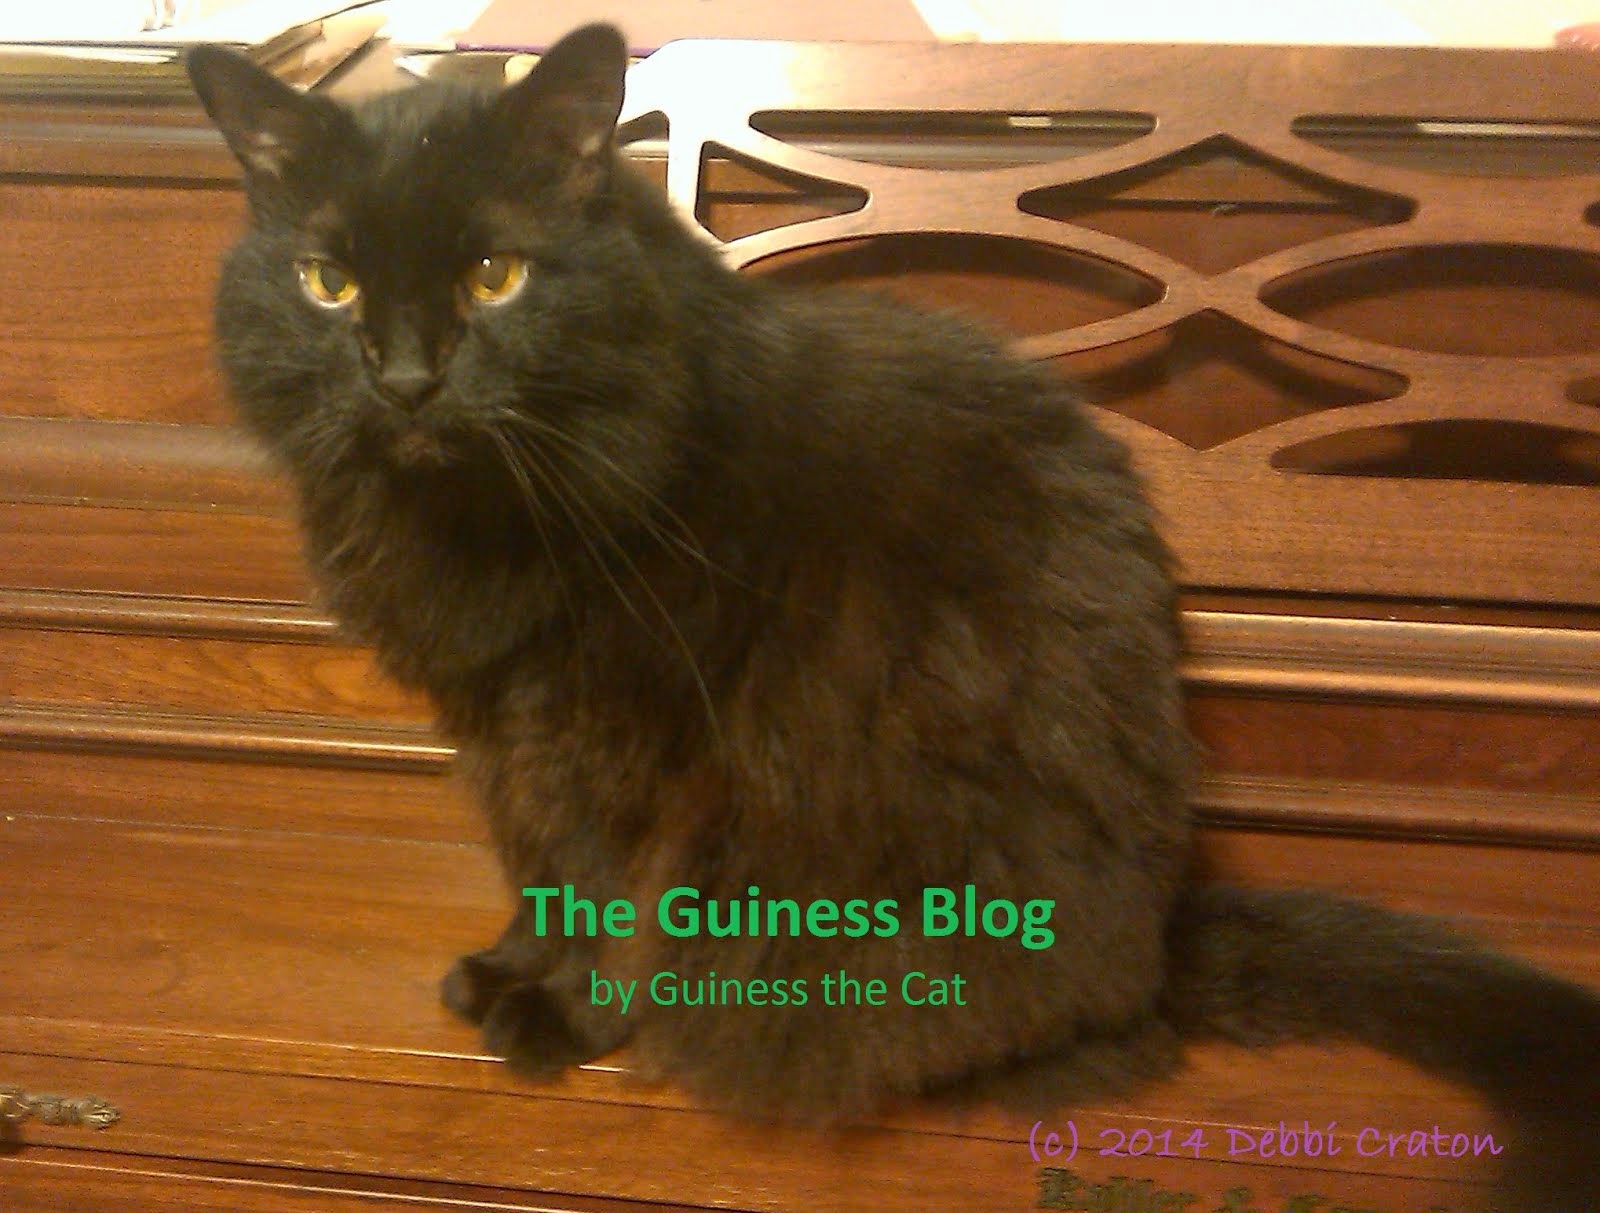 The Guiness Blog by Guiness the Cat